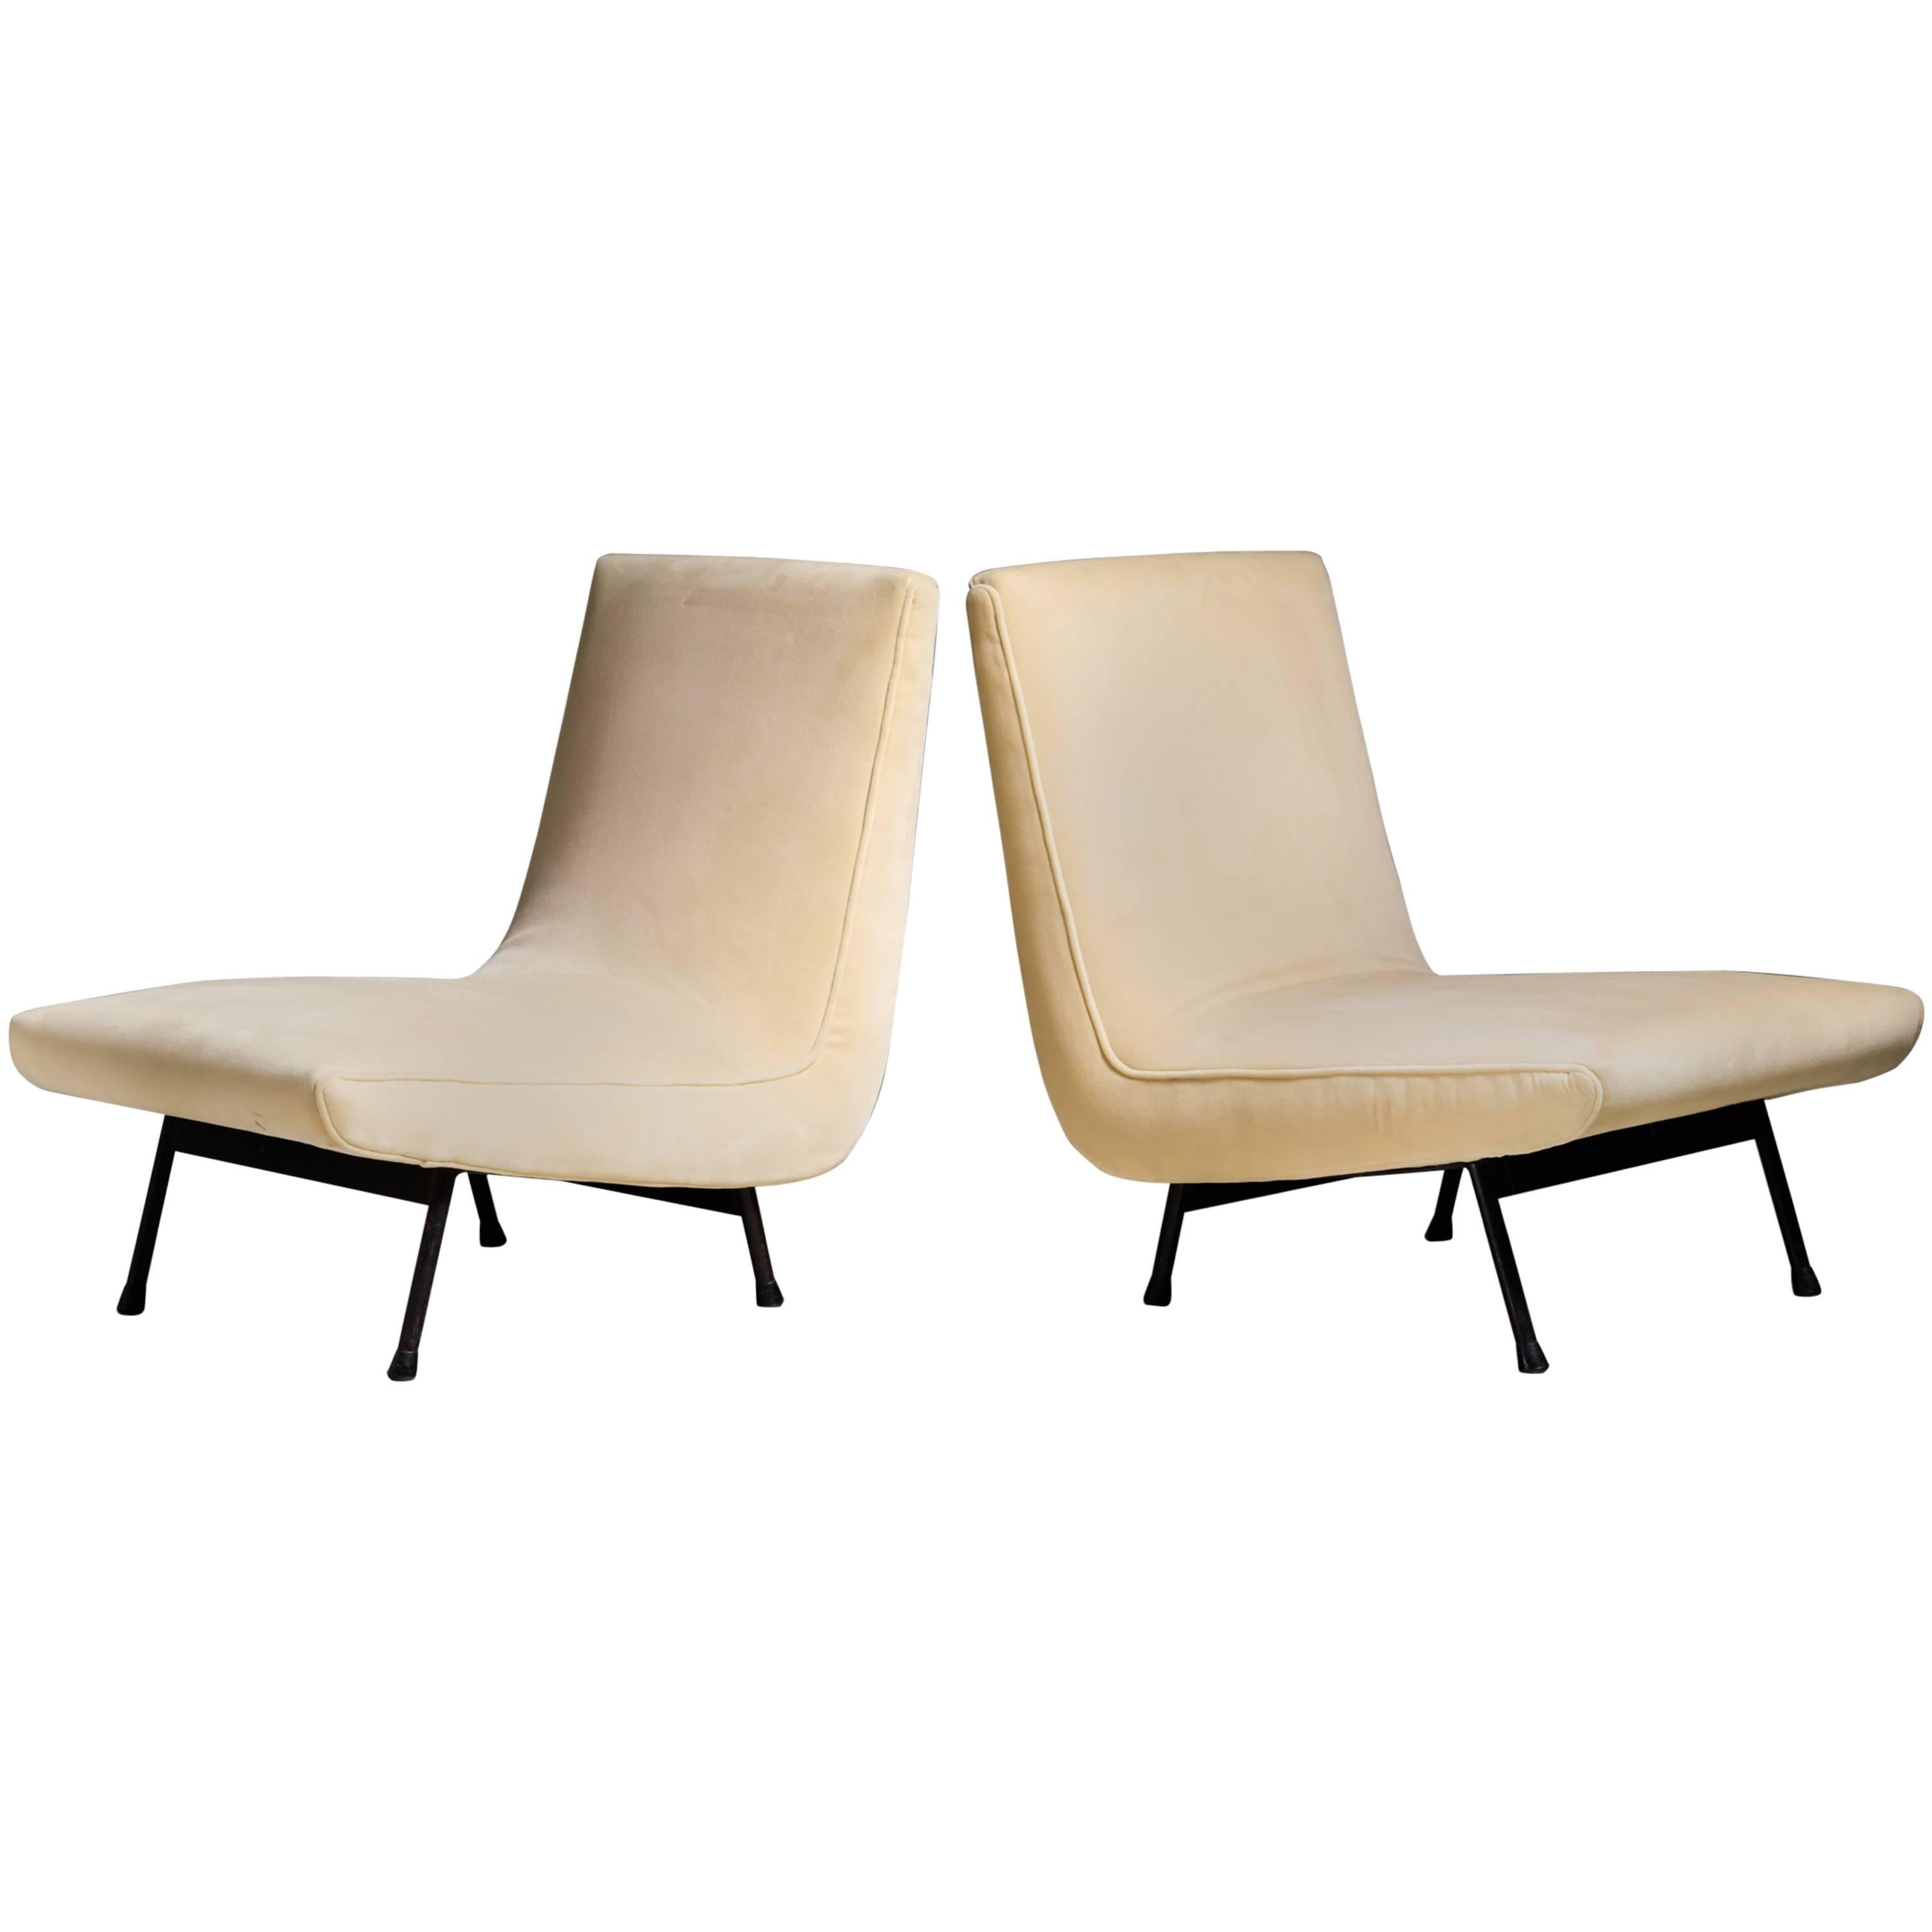 Pair of Cream White Slipper Chairs, France, 1950s For Sale